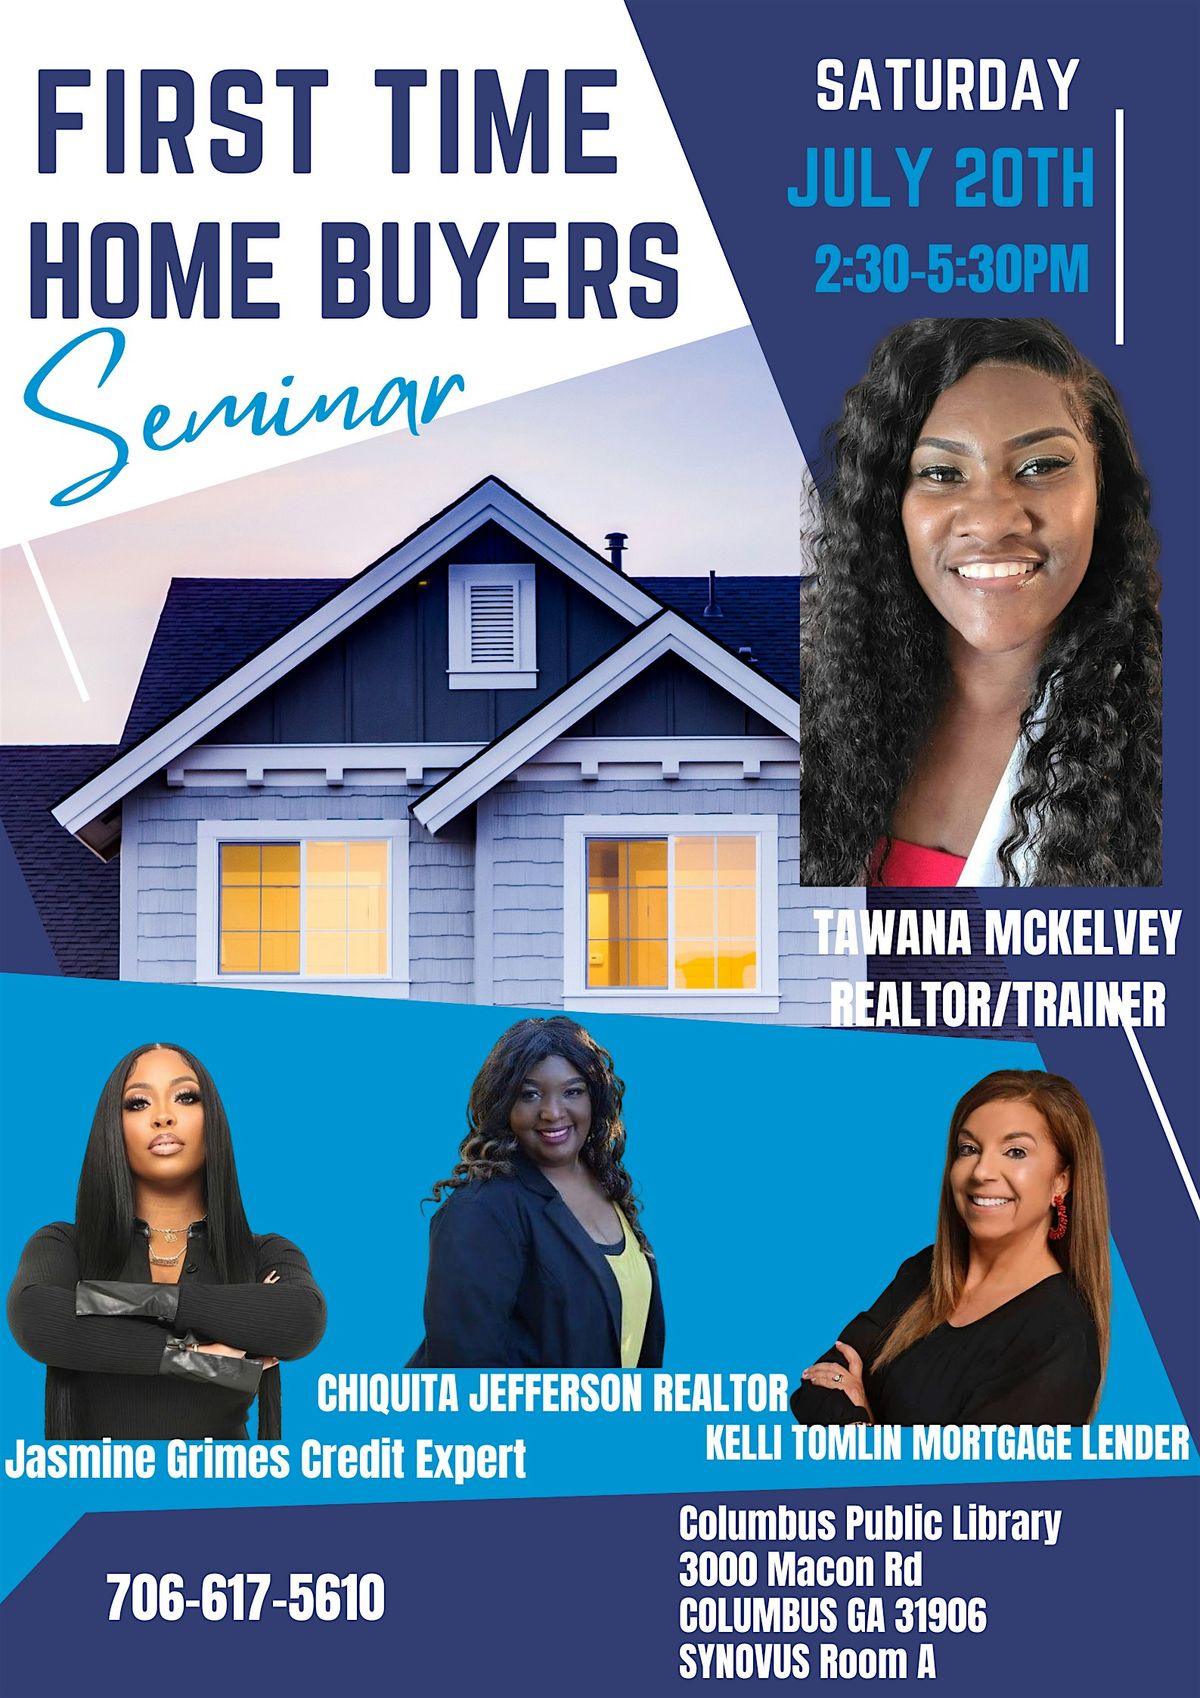 First time home buyers seminar